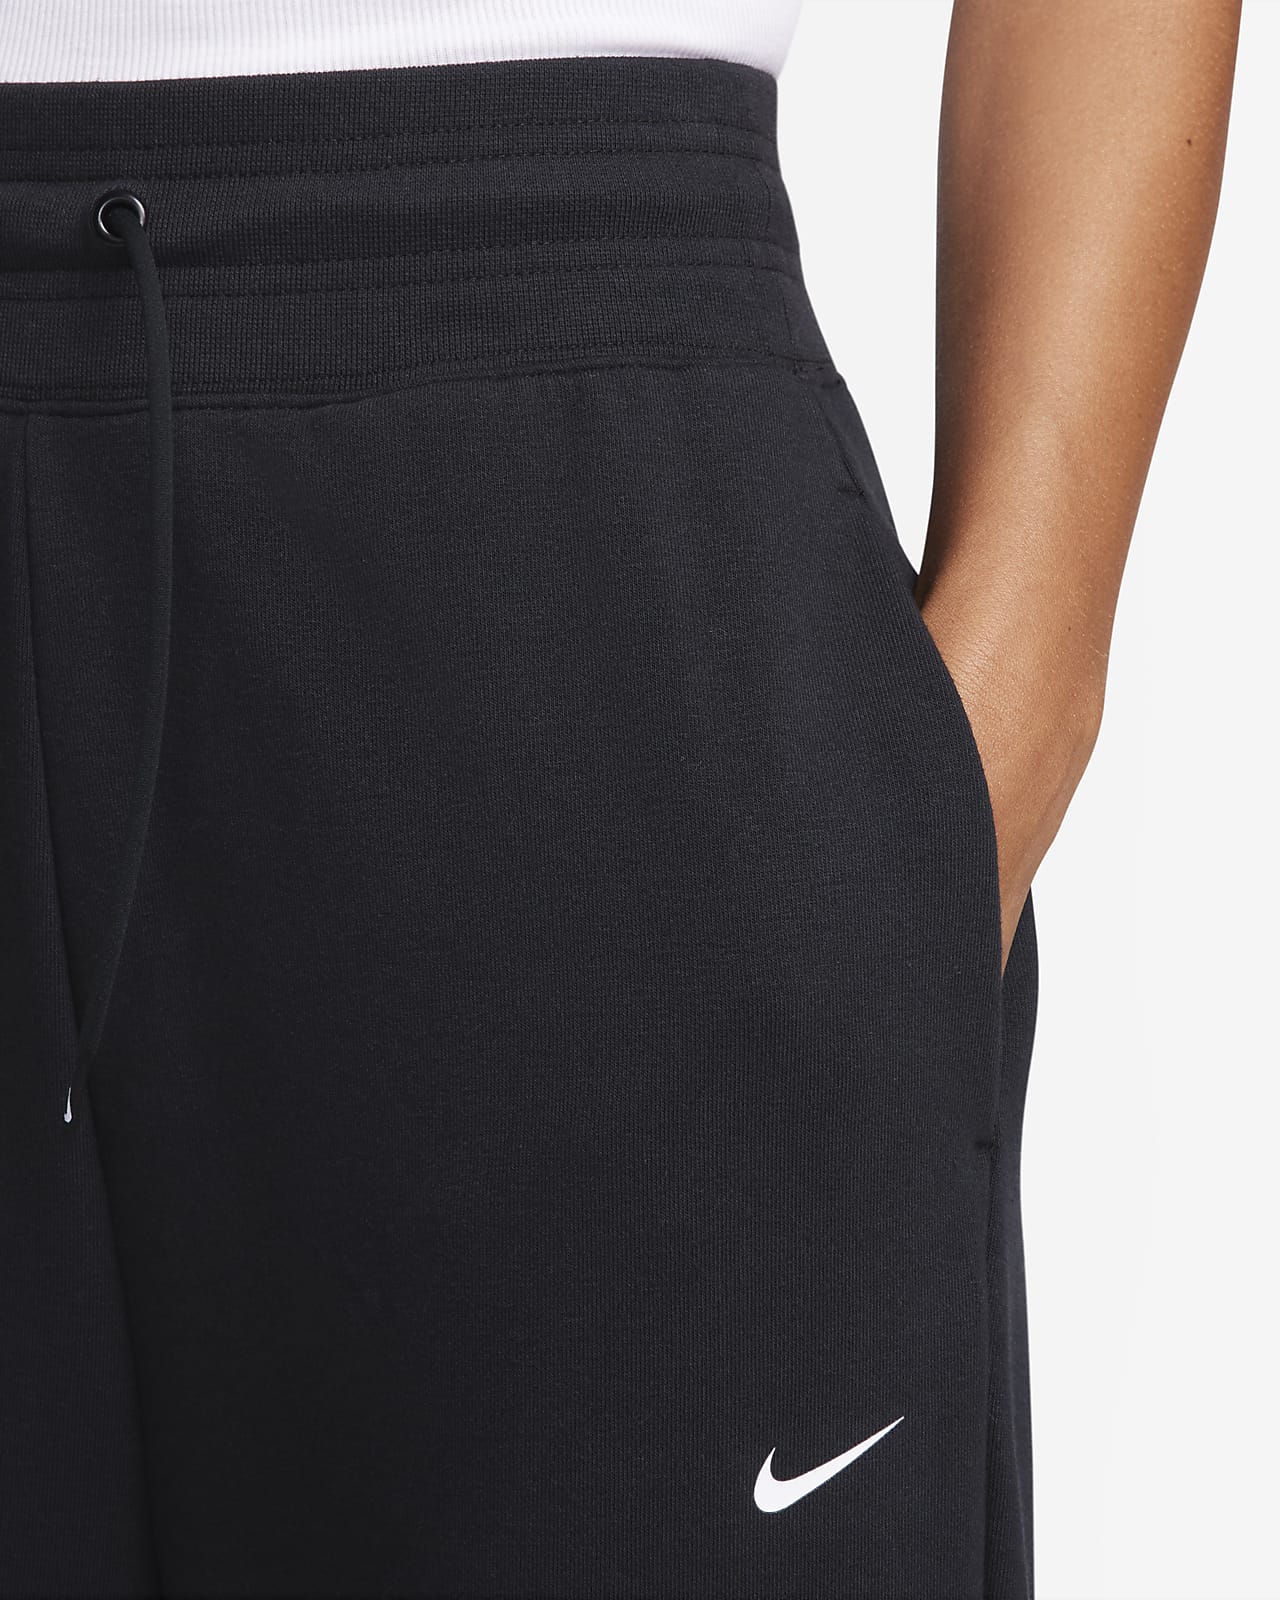 Nike Women's Rally Sweatpants Elastic Waist Terry-Lined Polycotton Athletic  Pant